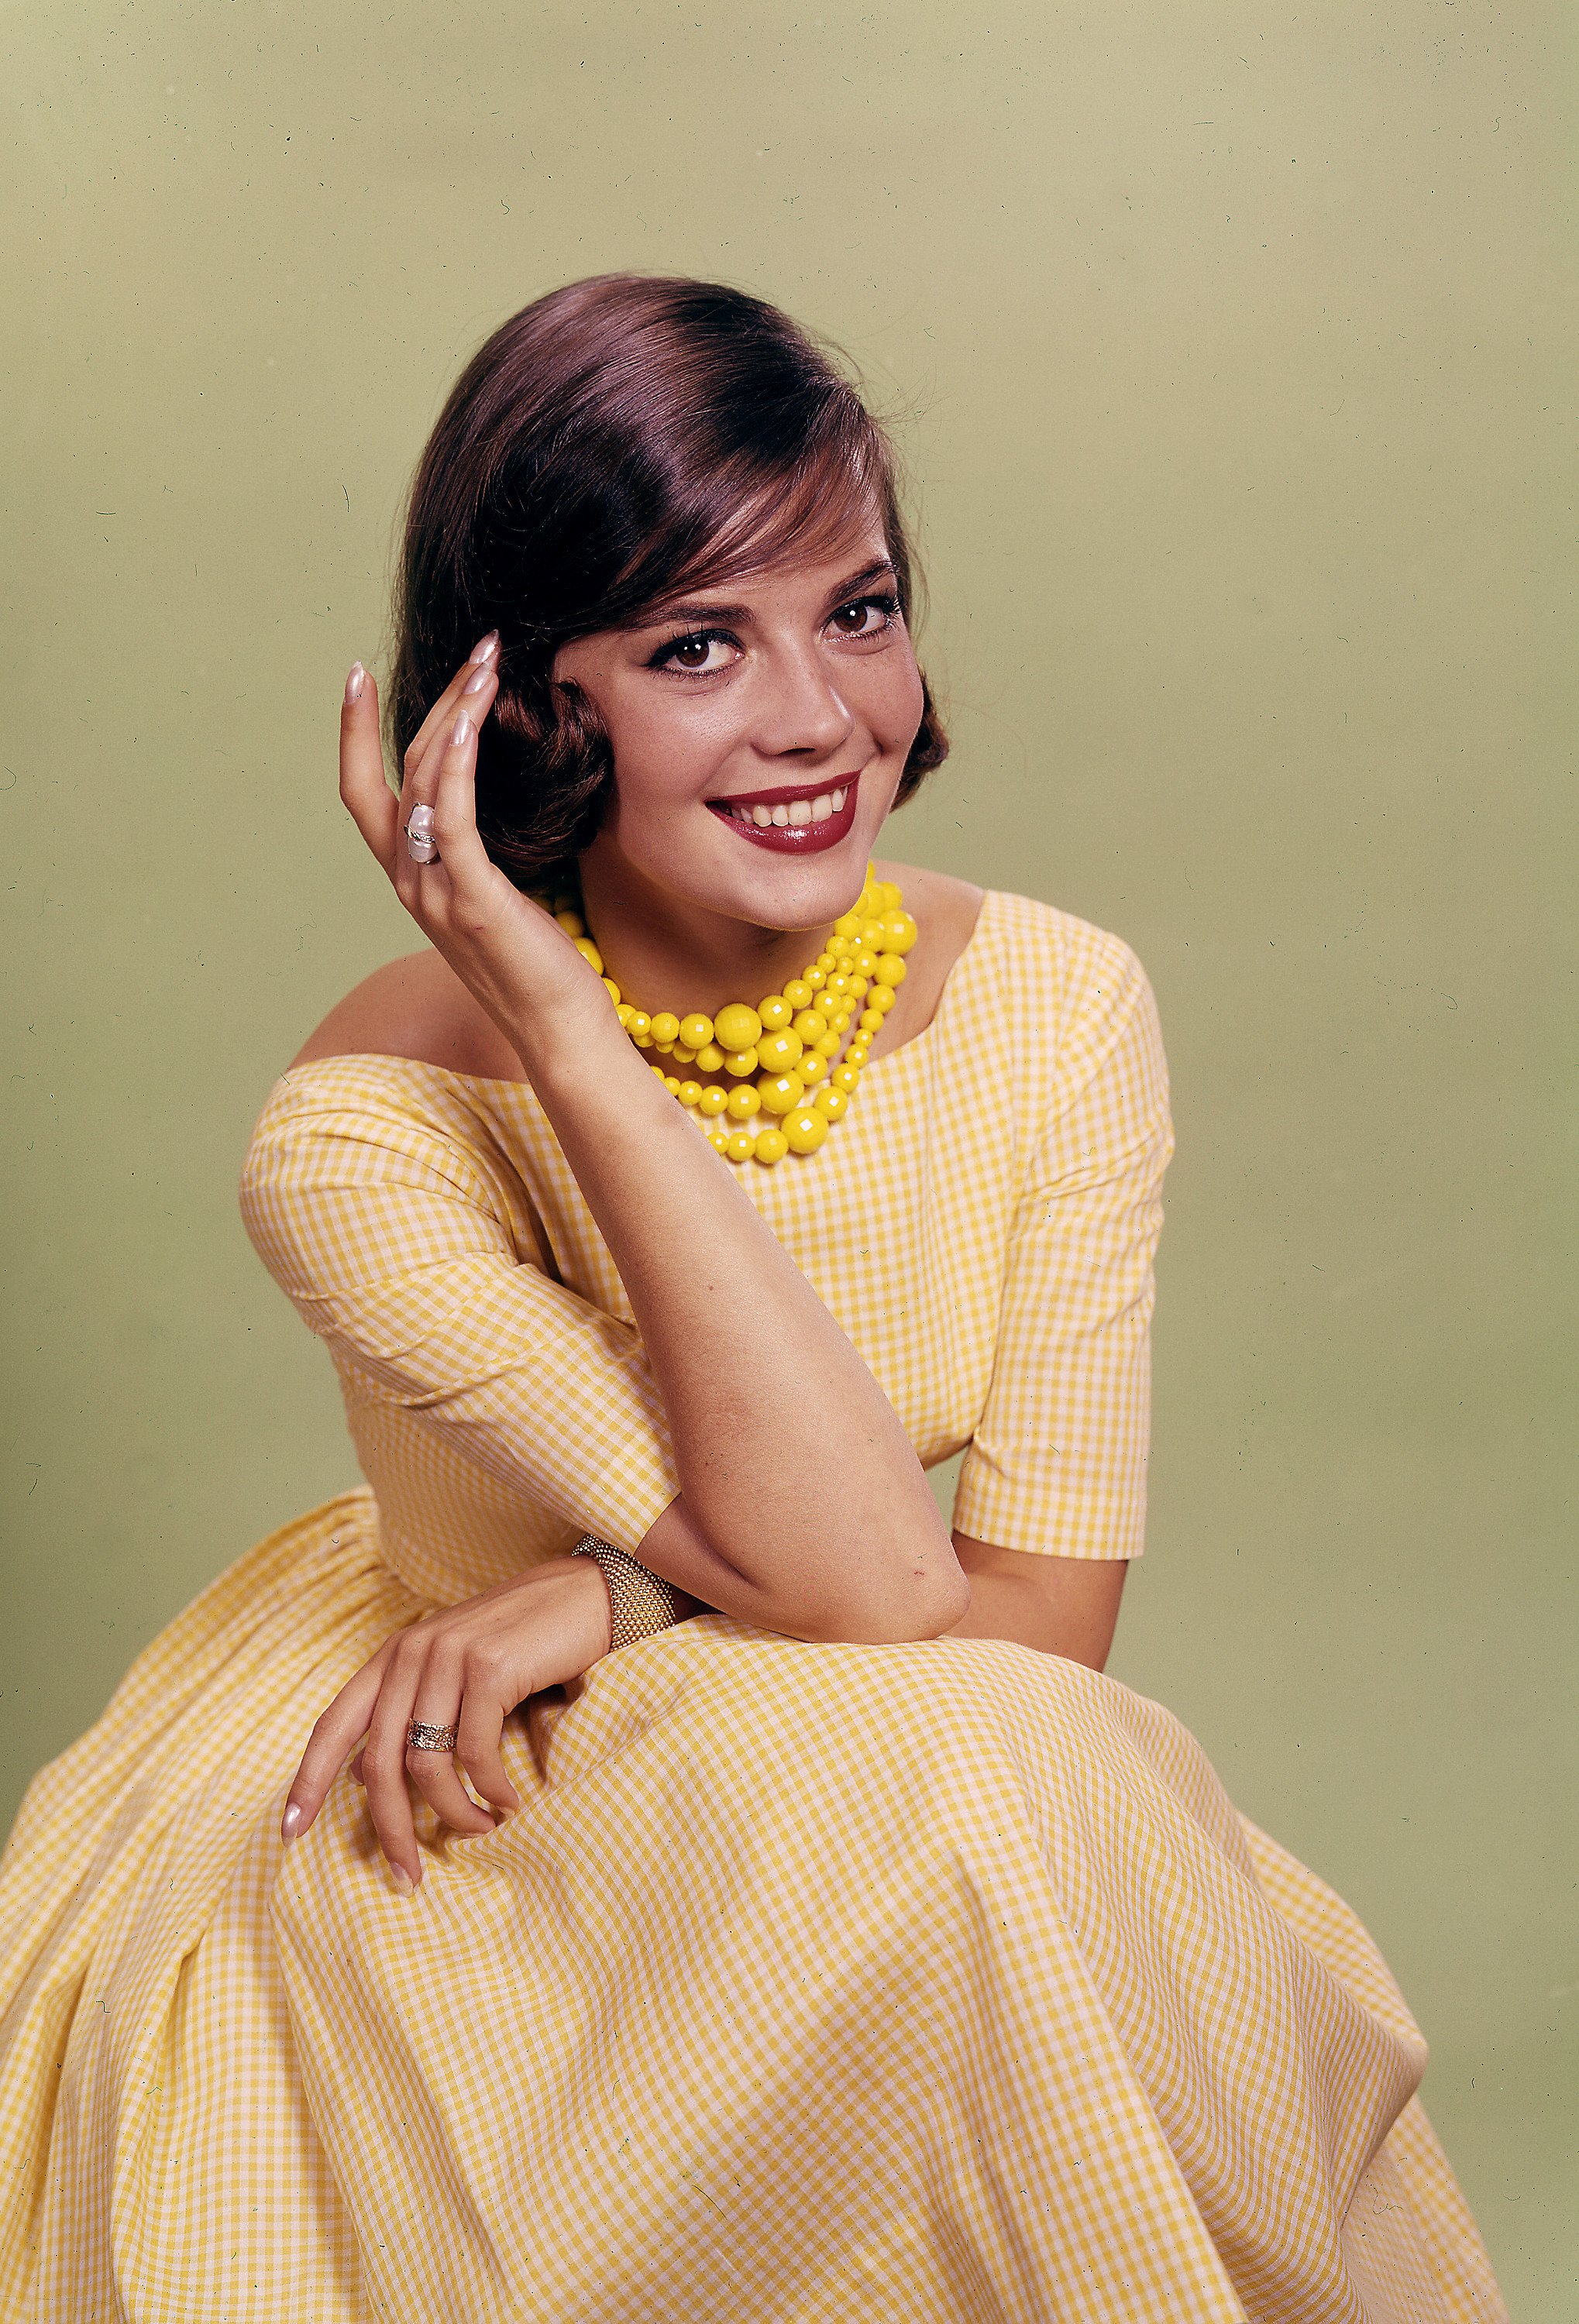  Natalie Wood in the Daily News color studio. | Source: Getty Images